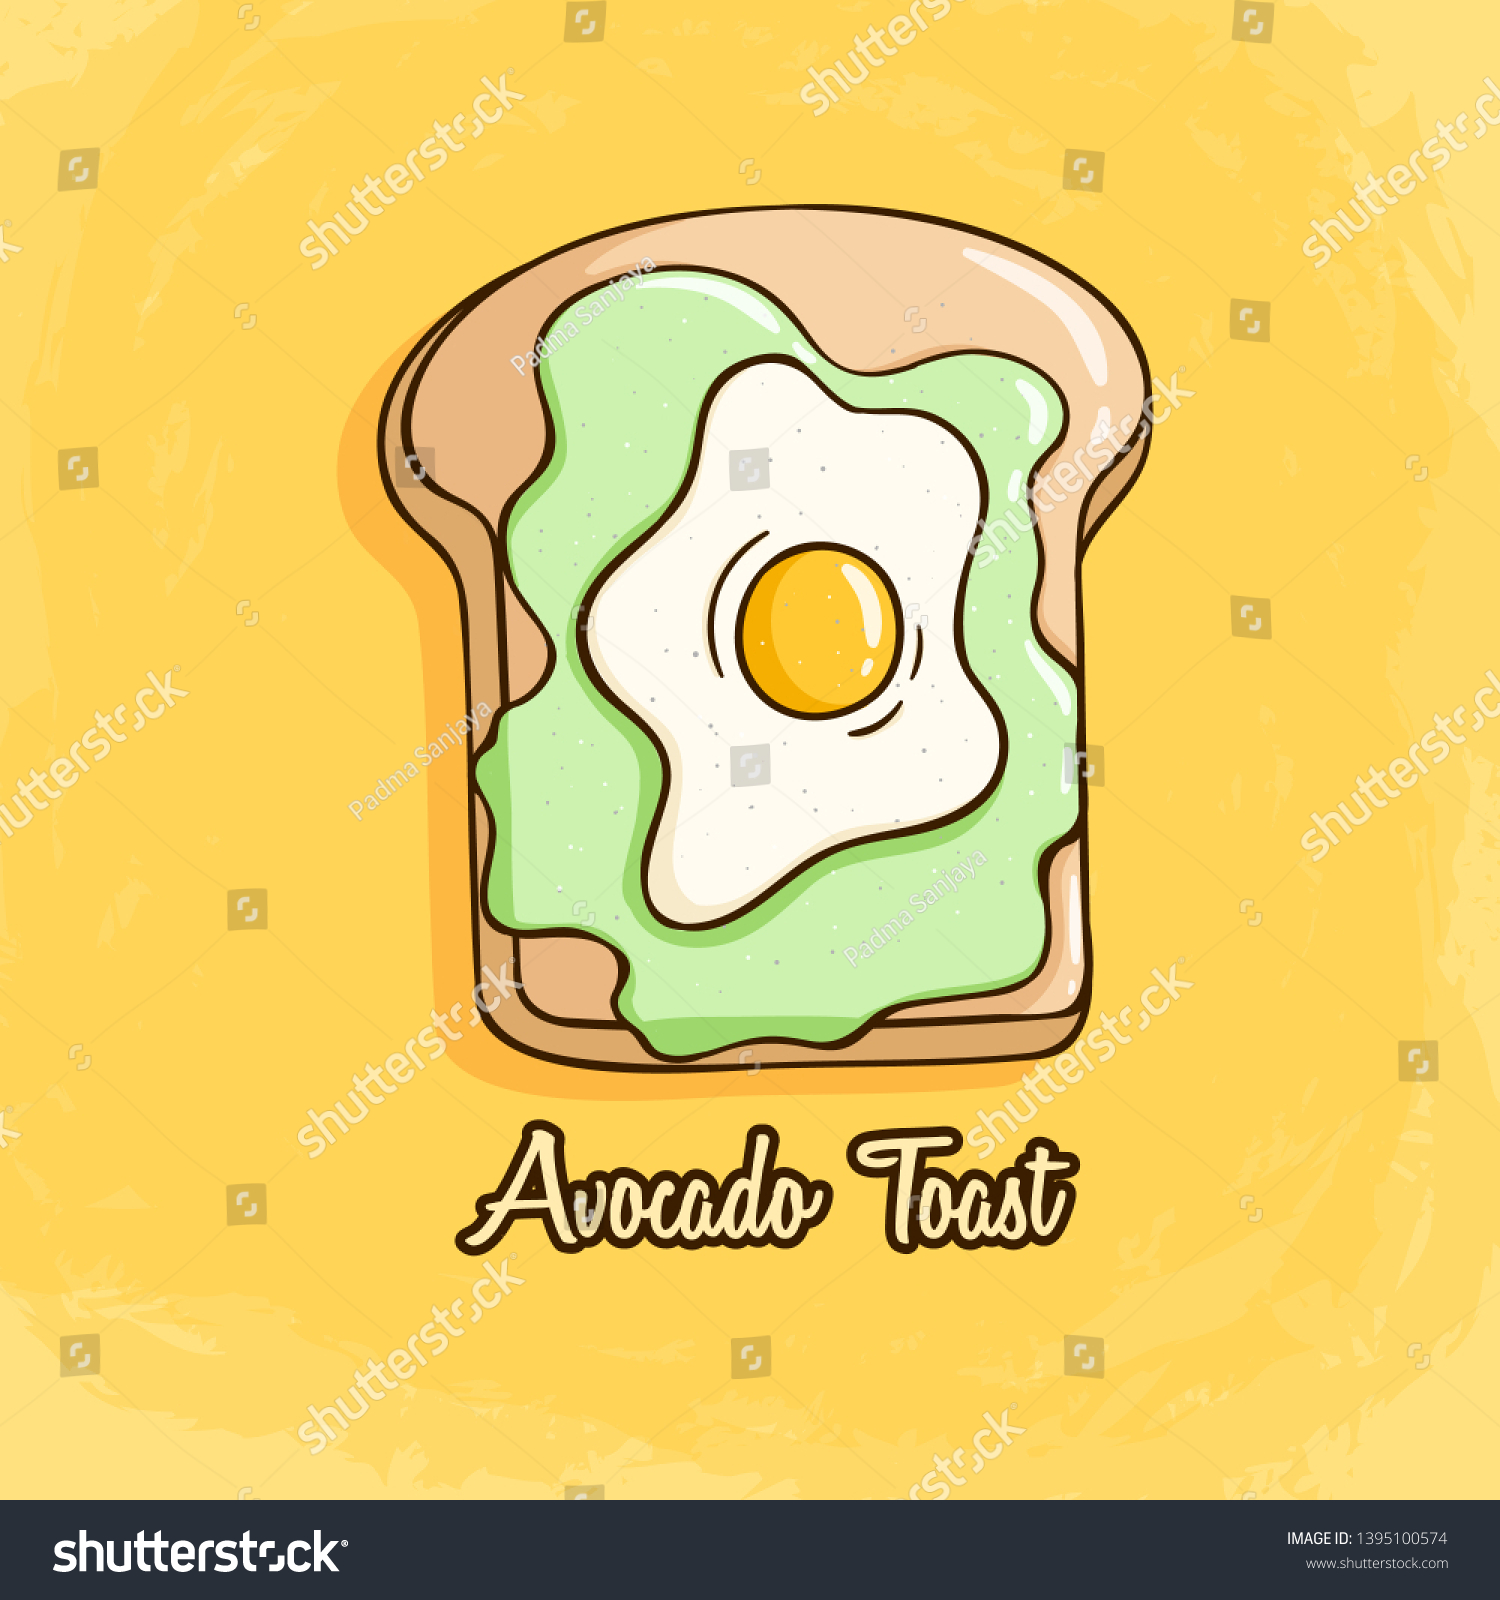 SVG of Avocado toast with fried egg and bread.  Cute avocado toast with colored doodle style on yellow background svg